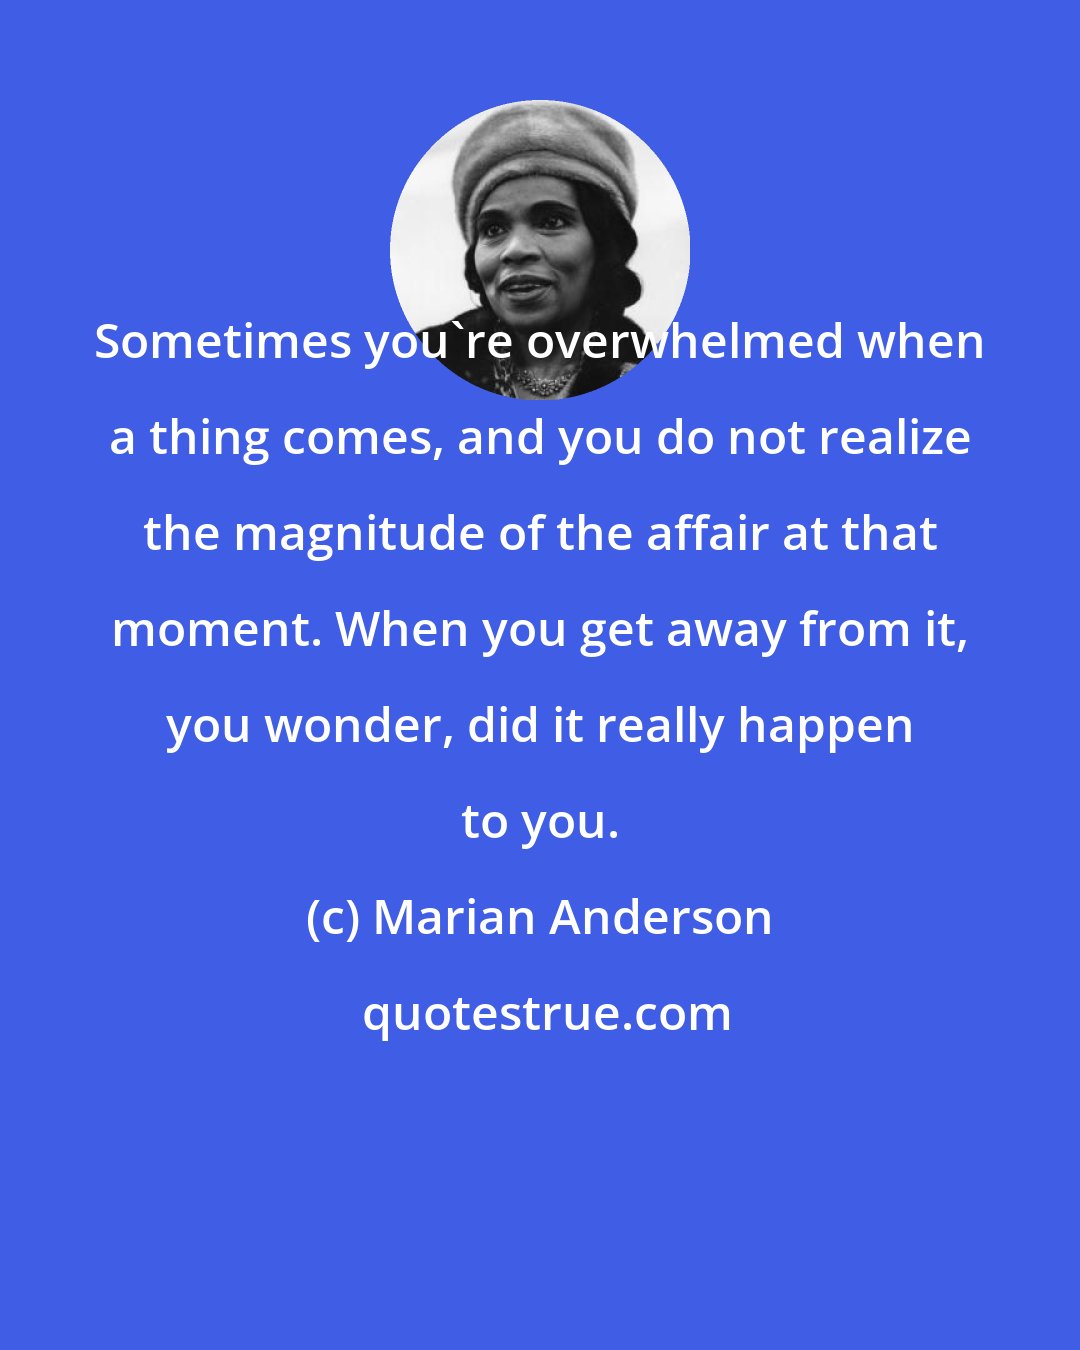 Marian Anderson: Sometimes you're overwhelmed when a thing comes, and you do not realize the magnitude of the affair at that moment. When you get away from it, you wonder, did it really happen to you.